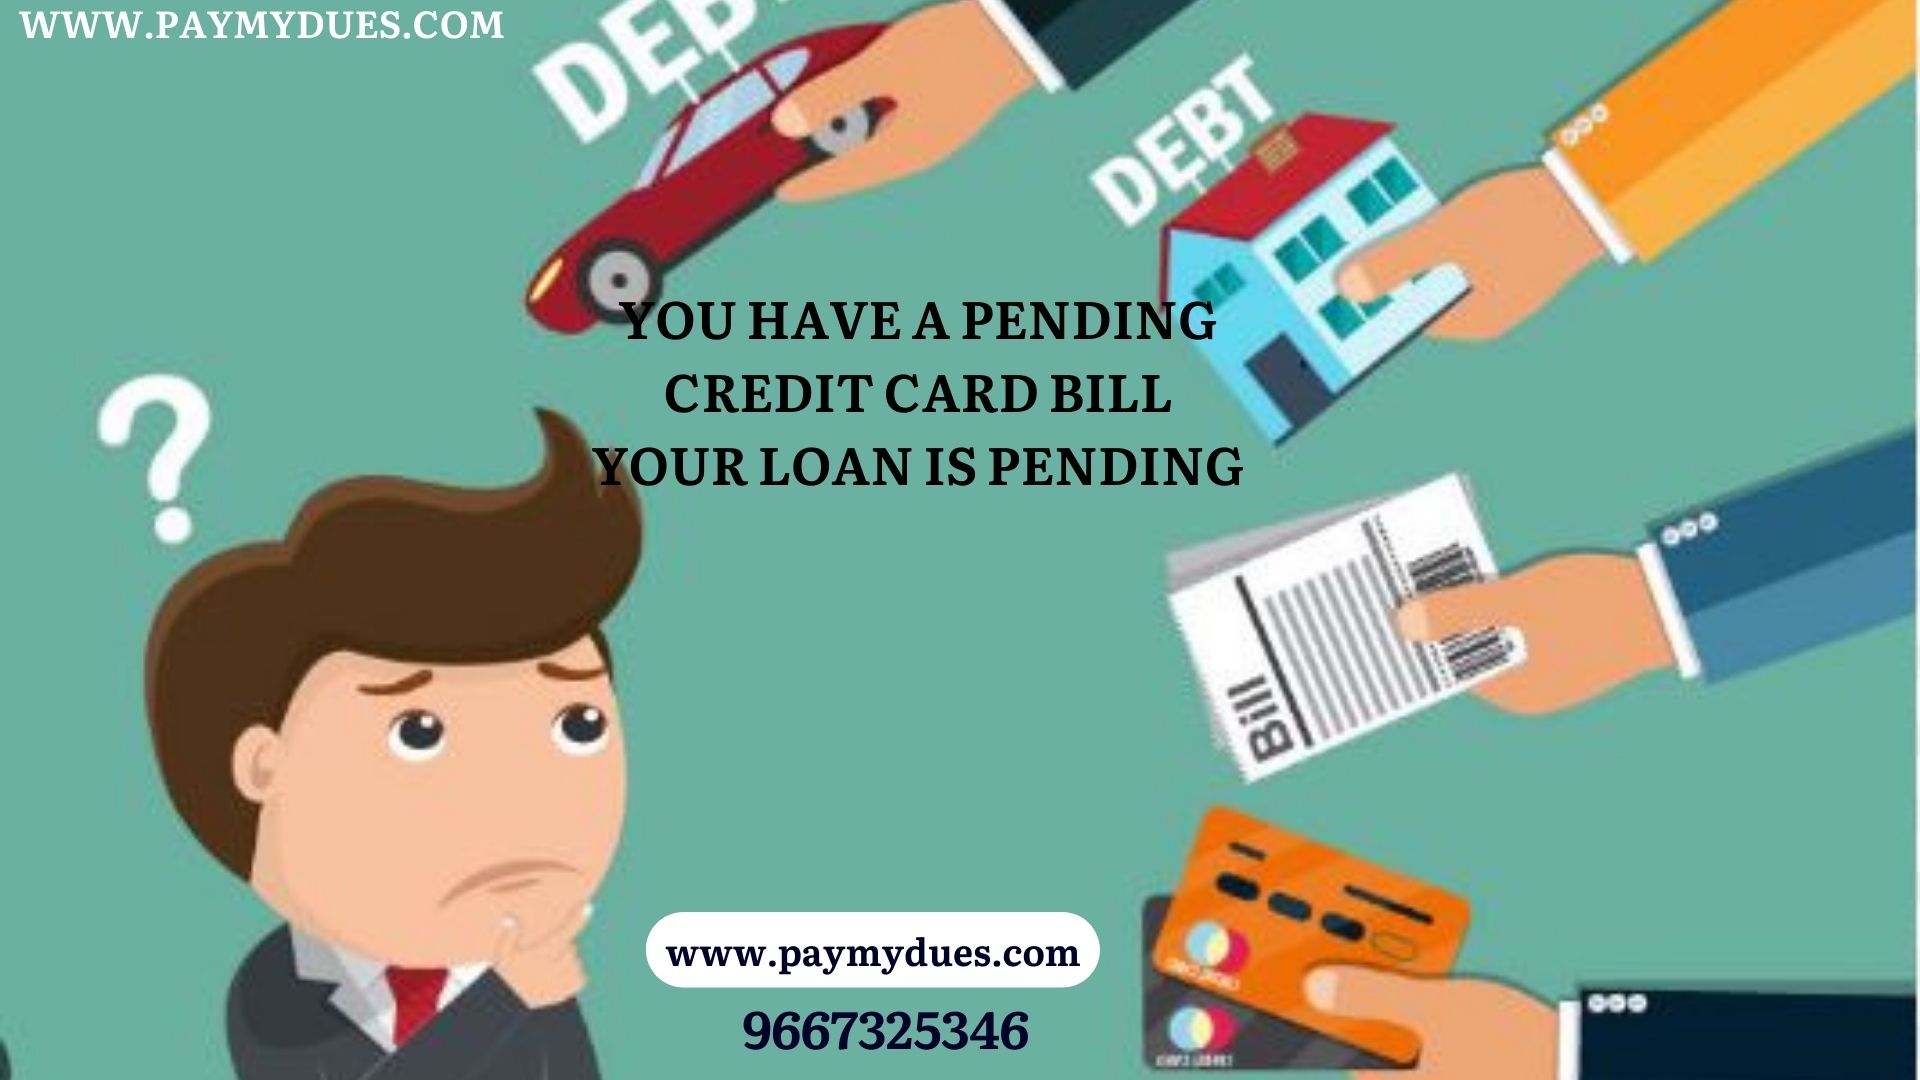 YOU HAVE A PENDING CREDIT CARD BILL